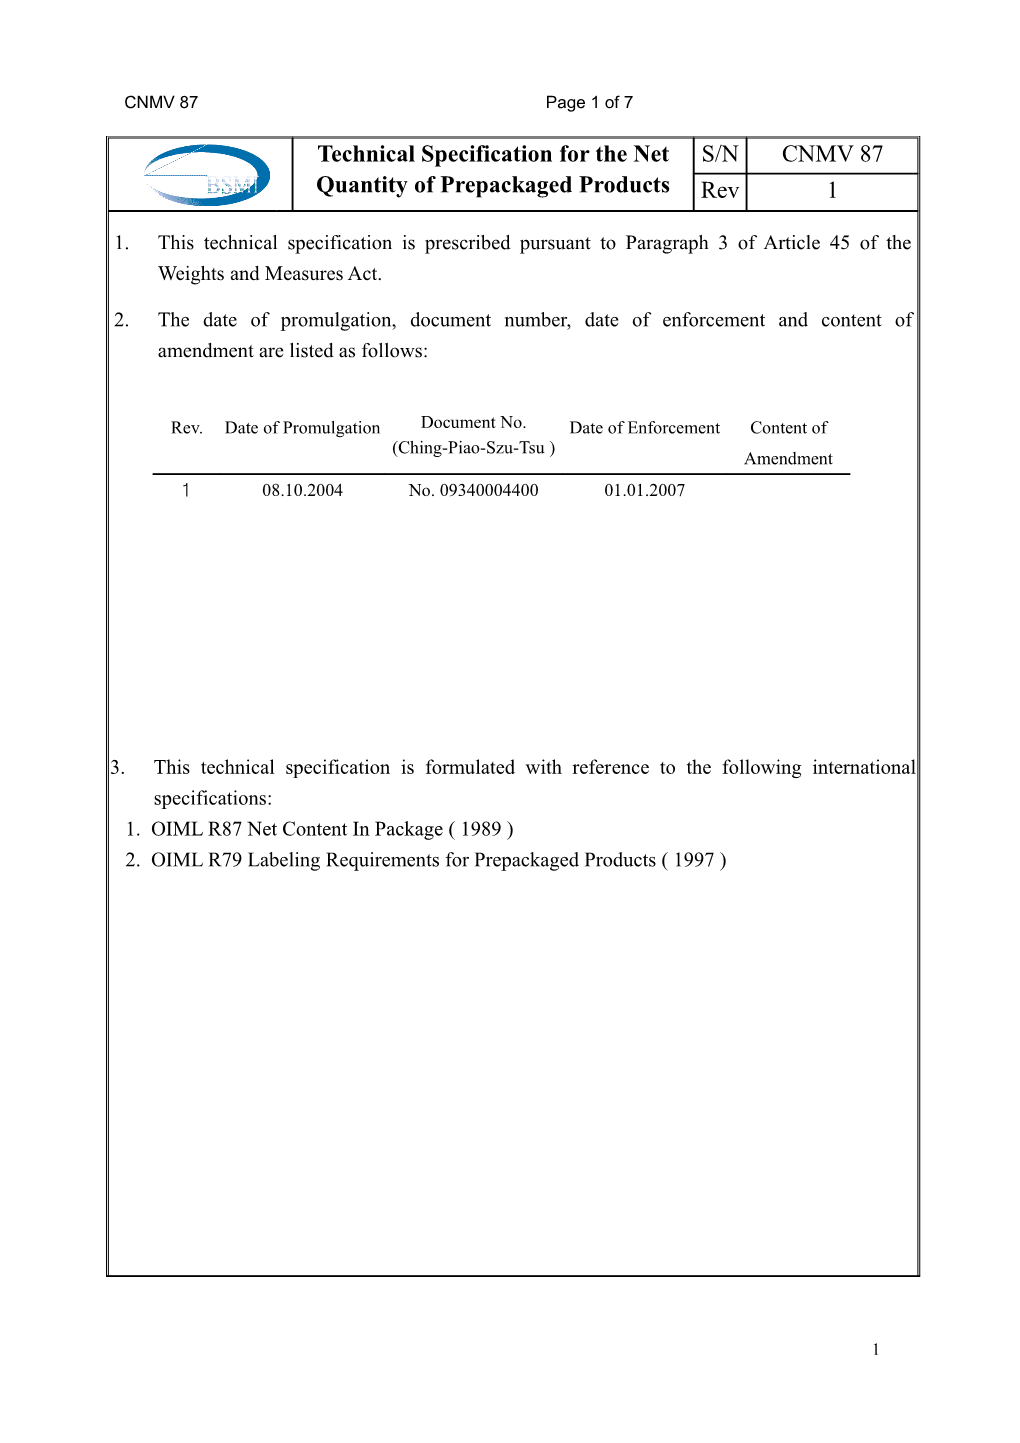 Technical Specification for the Net Quantity of Prepackaged Products